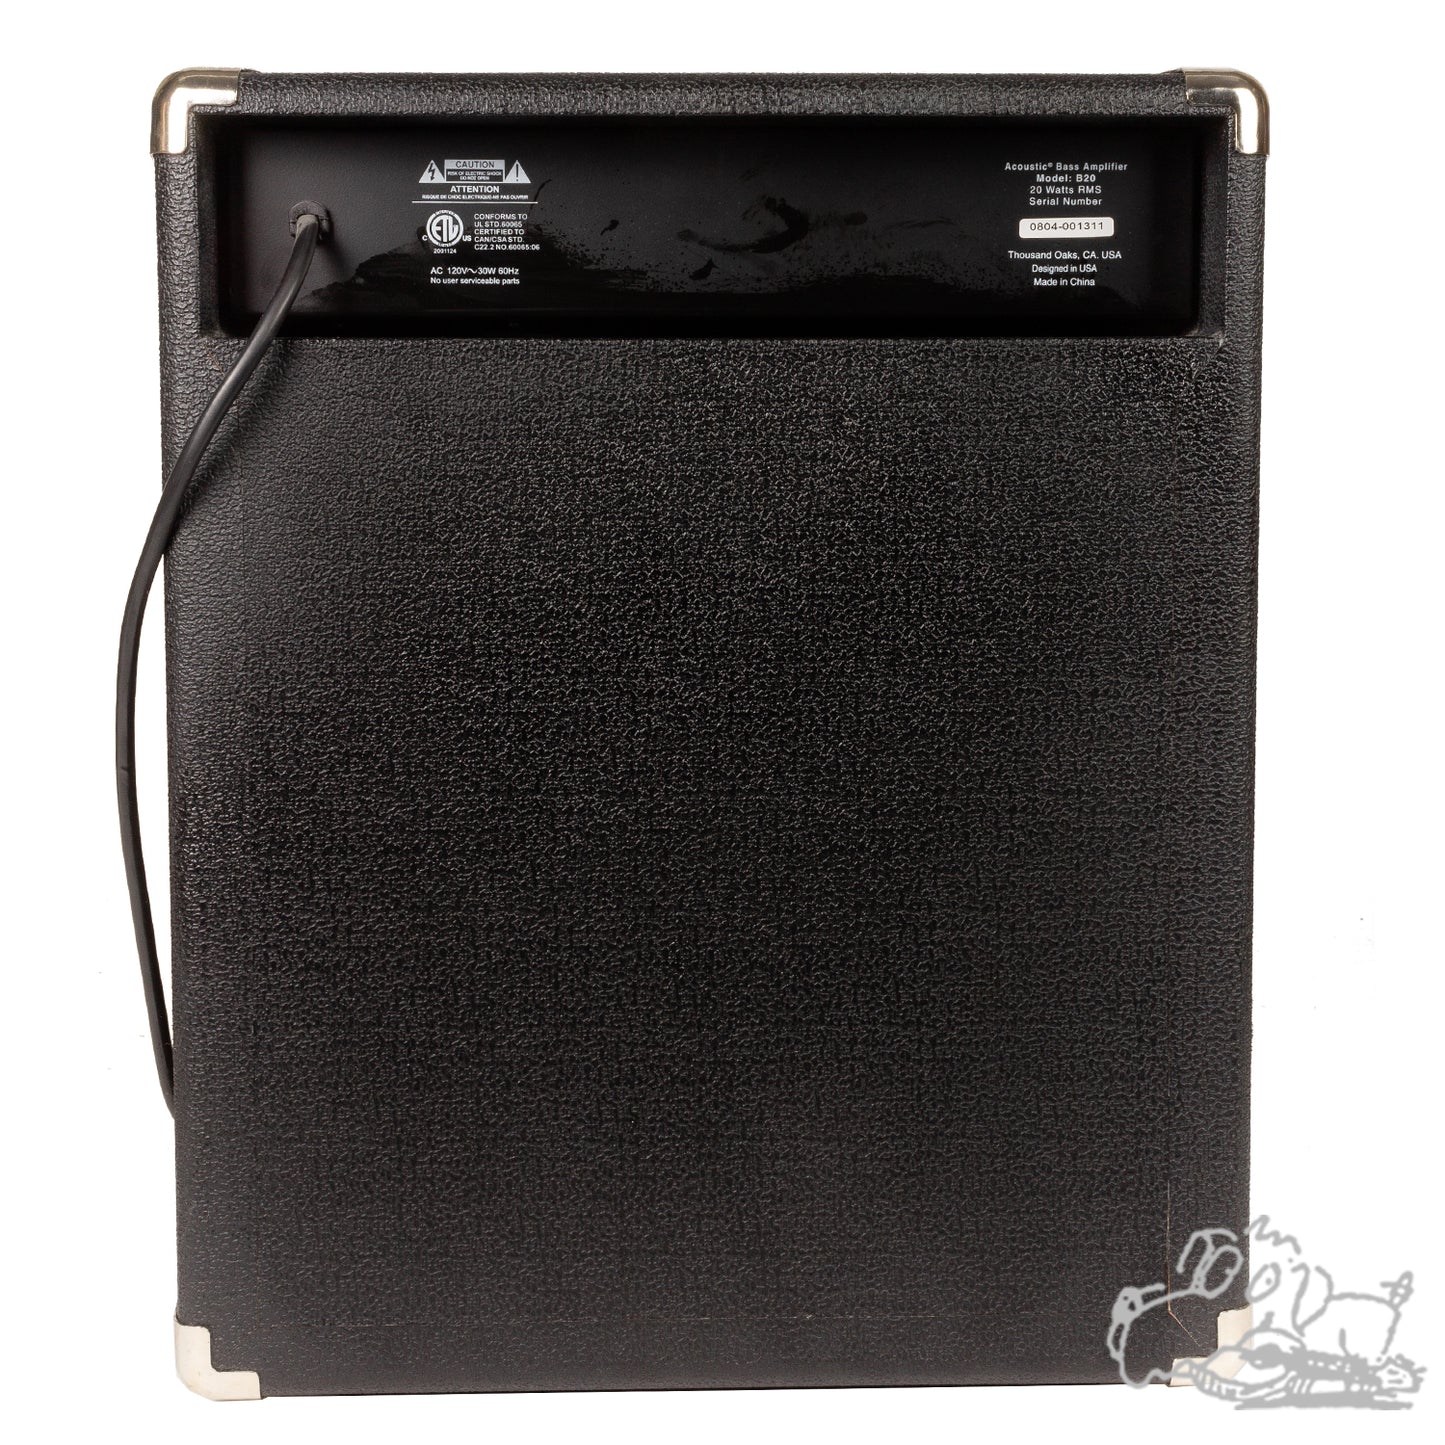 Used Acoustic B20 Bass Amplifier